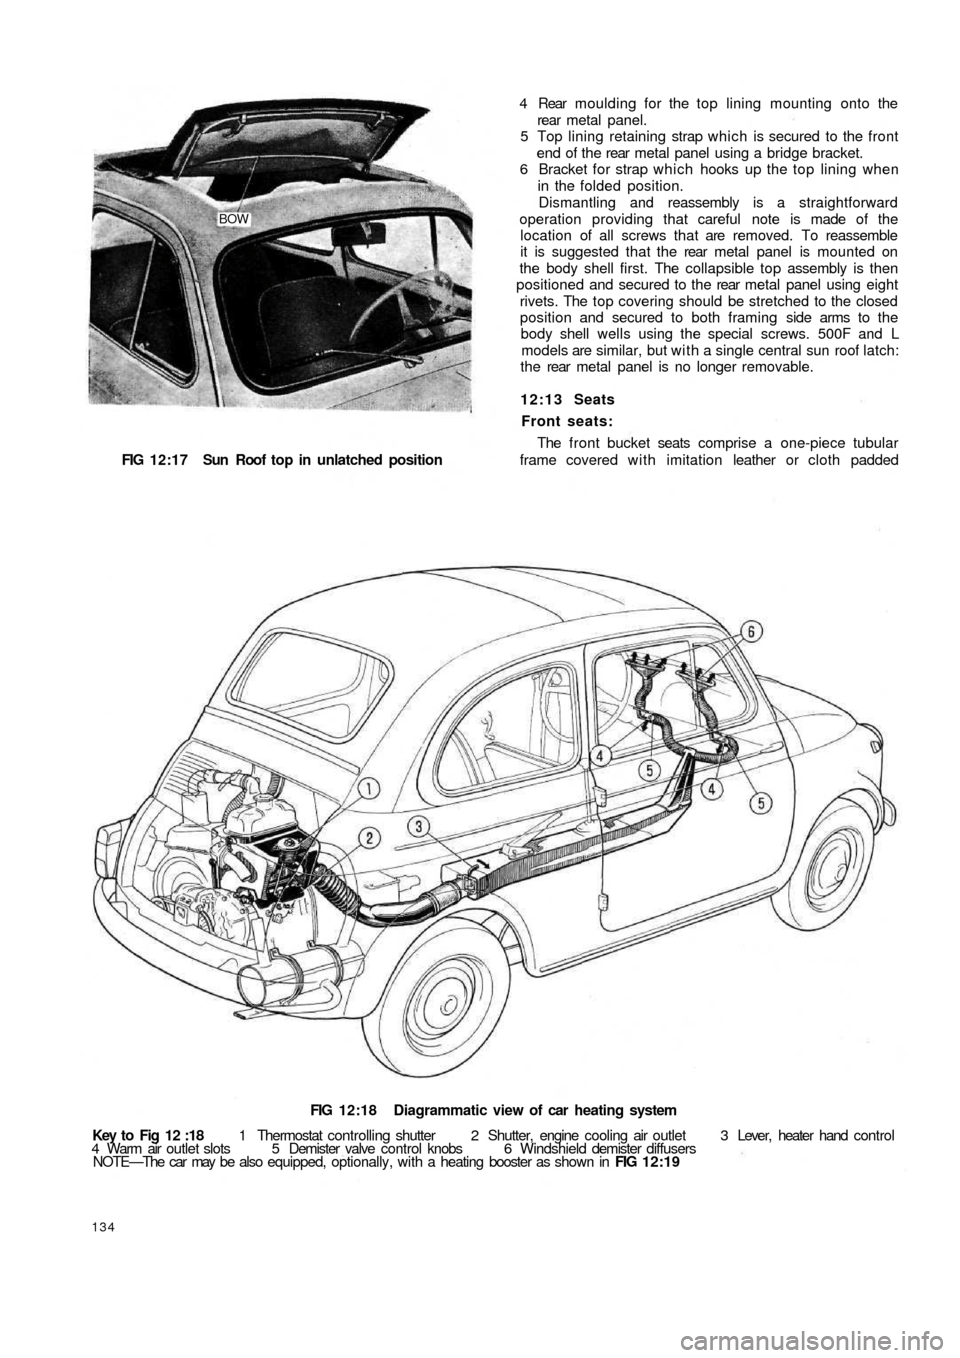 FIAT 500 1966 1.G Workshop Manual BOW
FIG 12:17  Sun Roof  top   in  unlatched position
FIG 12:18 Diagrammatic view of car heating system
Key to Fig 12 :18 1 Thermostat controlling shutter  2  Shutter,  engine  cooling air outlet  3 L